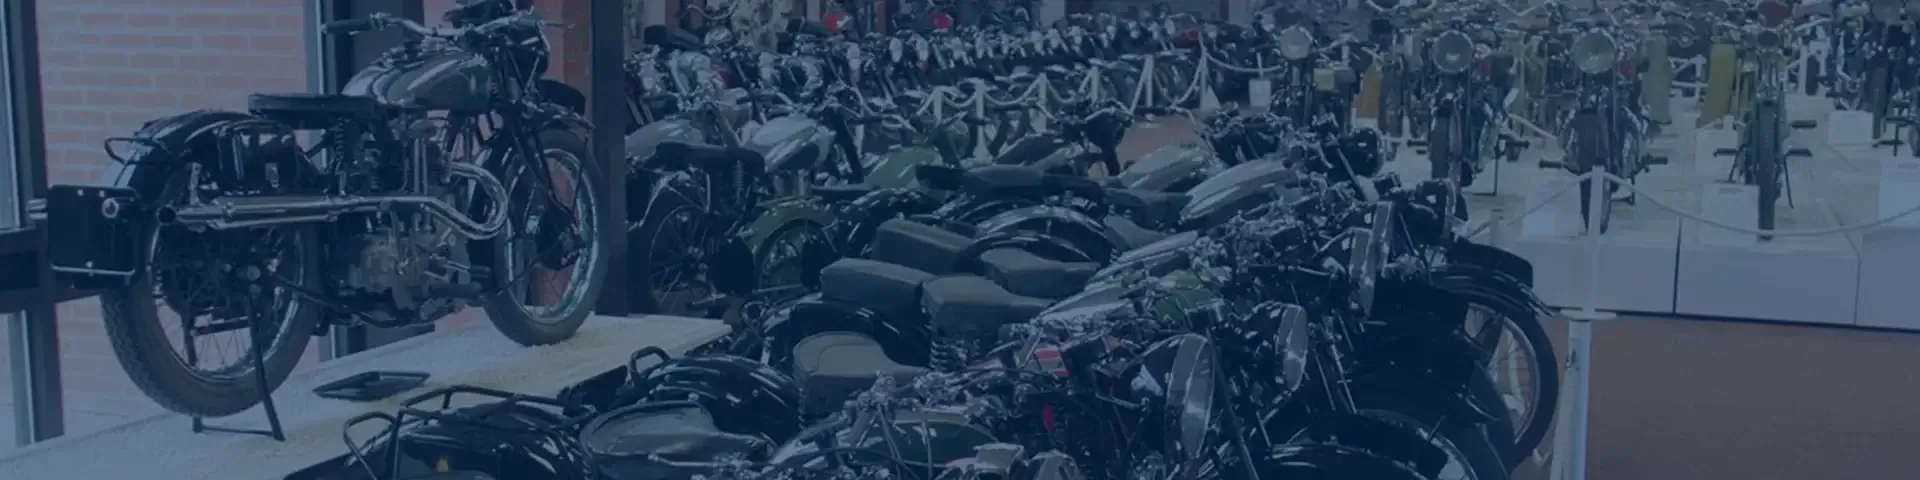 motorbikes on stands in rows in a store